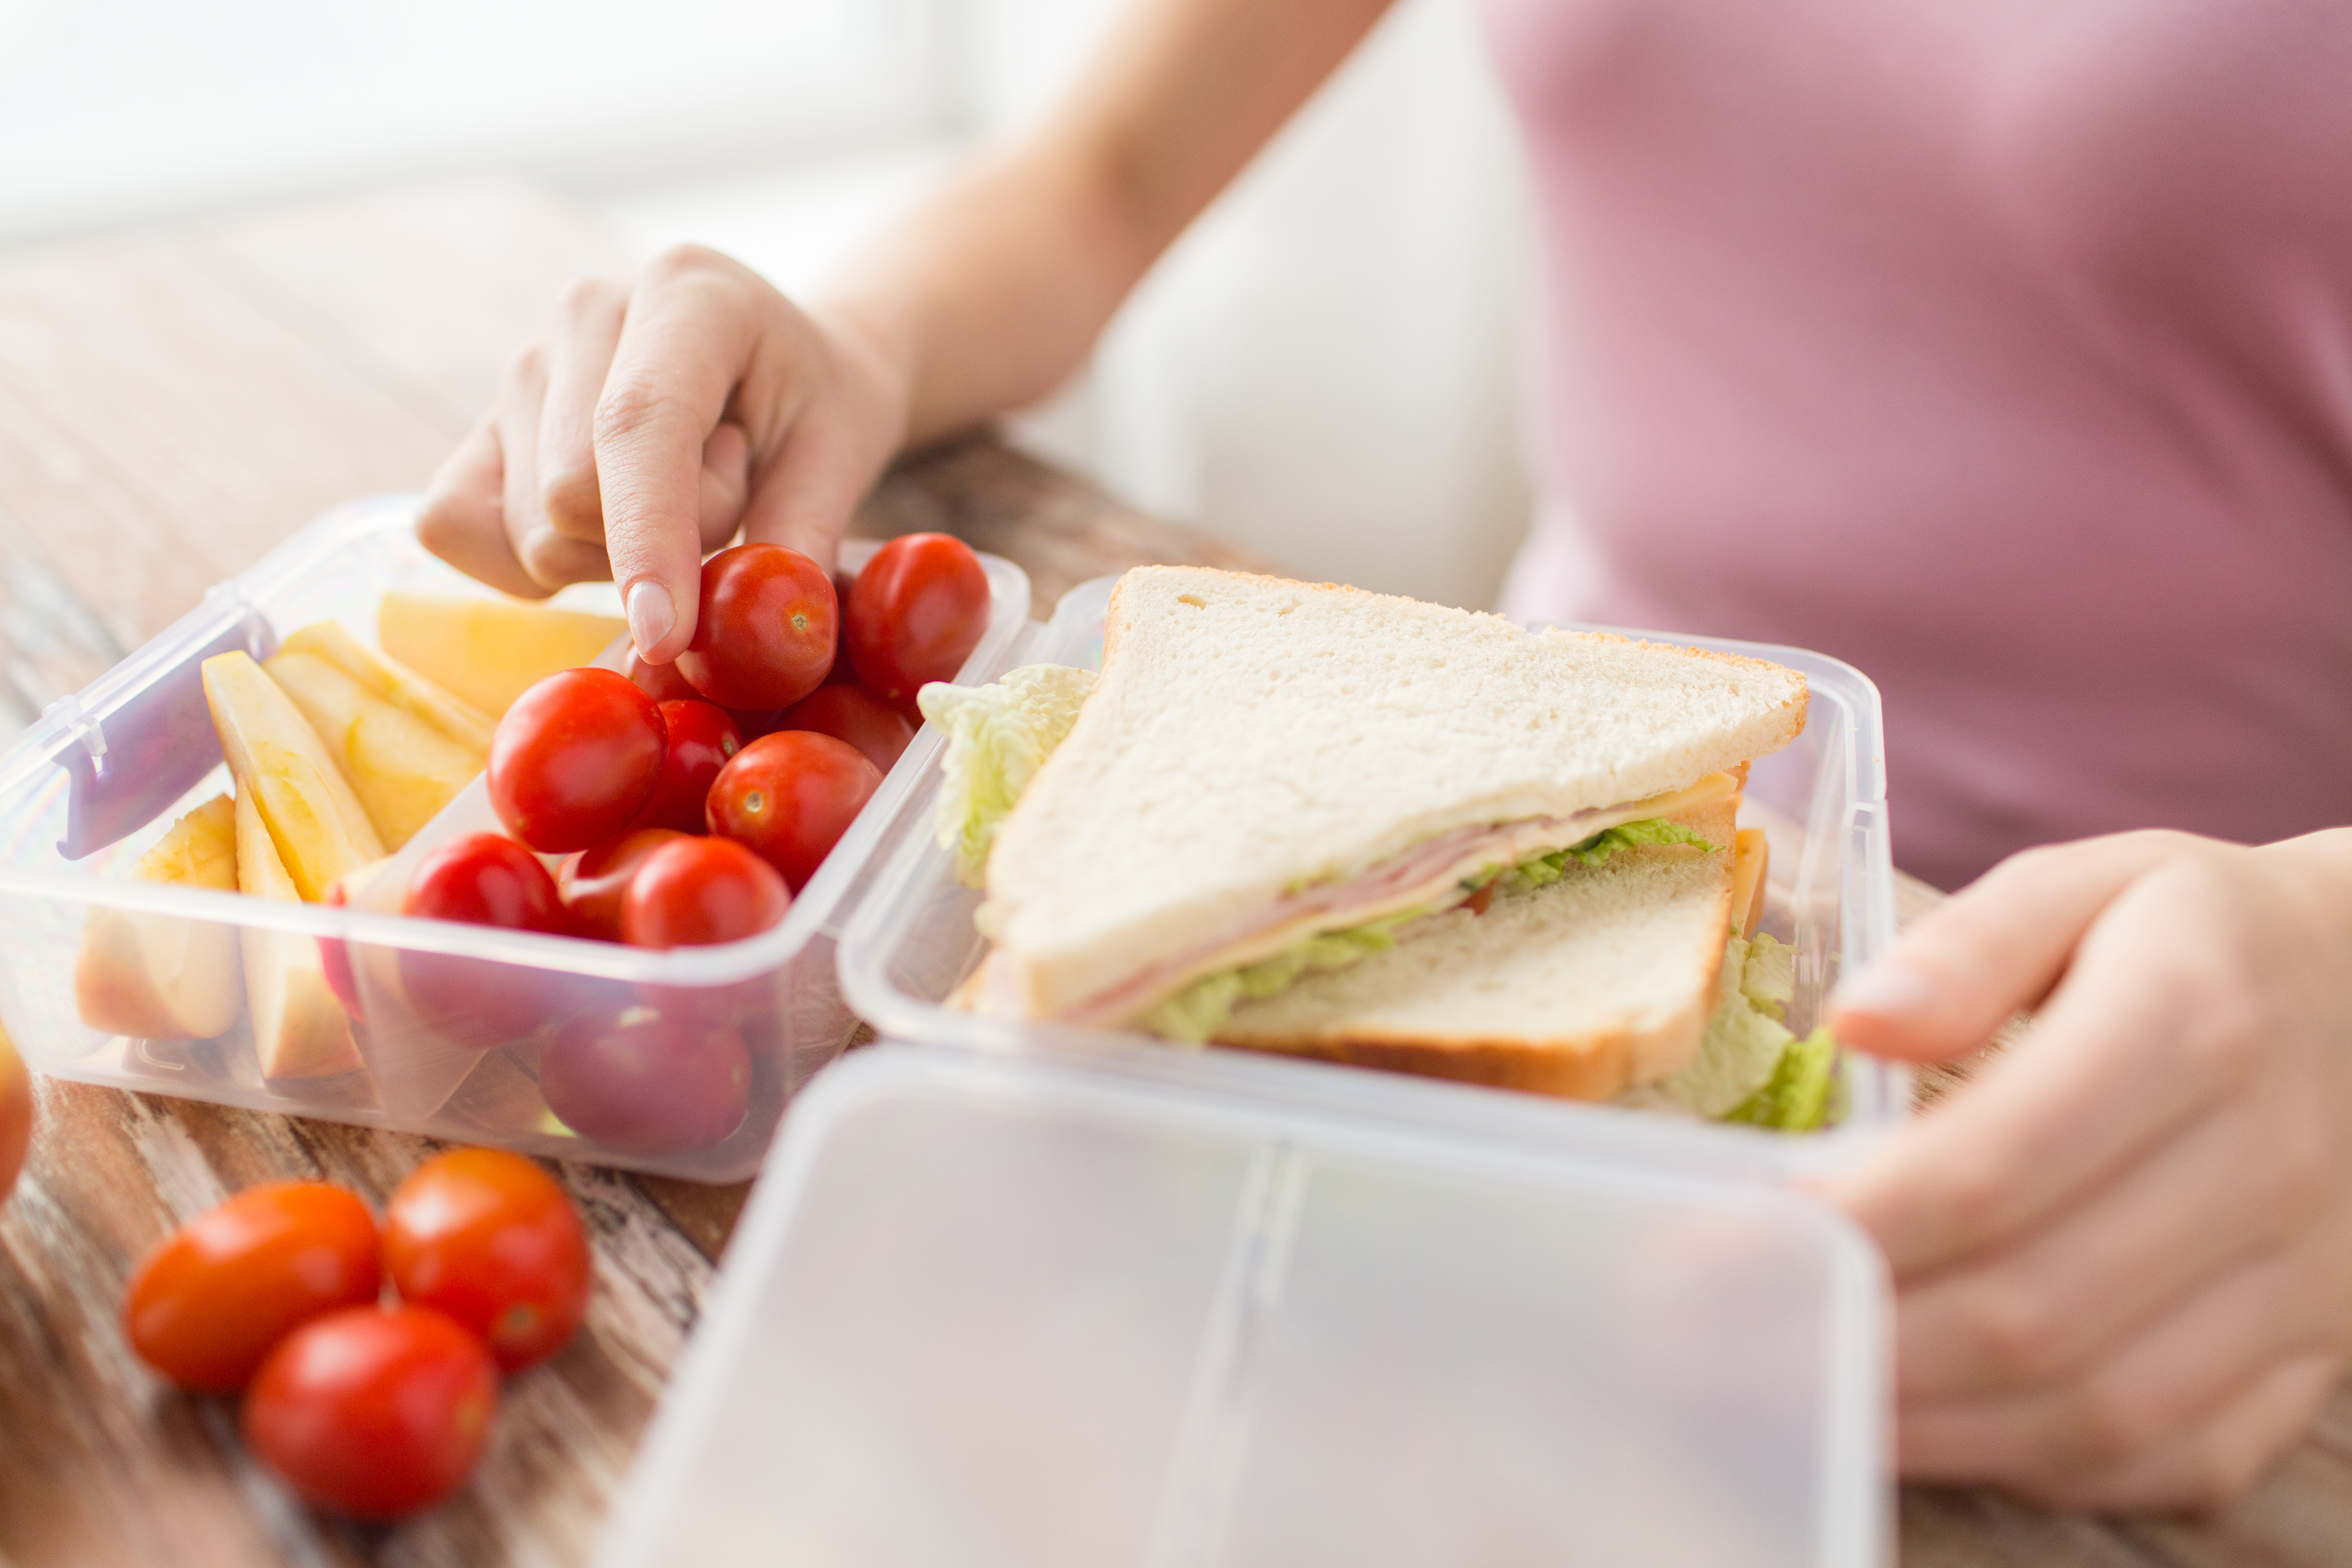 healthy eating, storage, dieting and people concept - close up of woman with food in plastic container at home kitchen